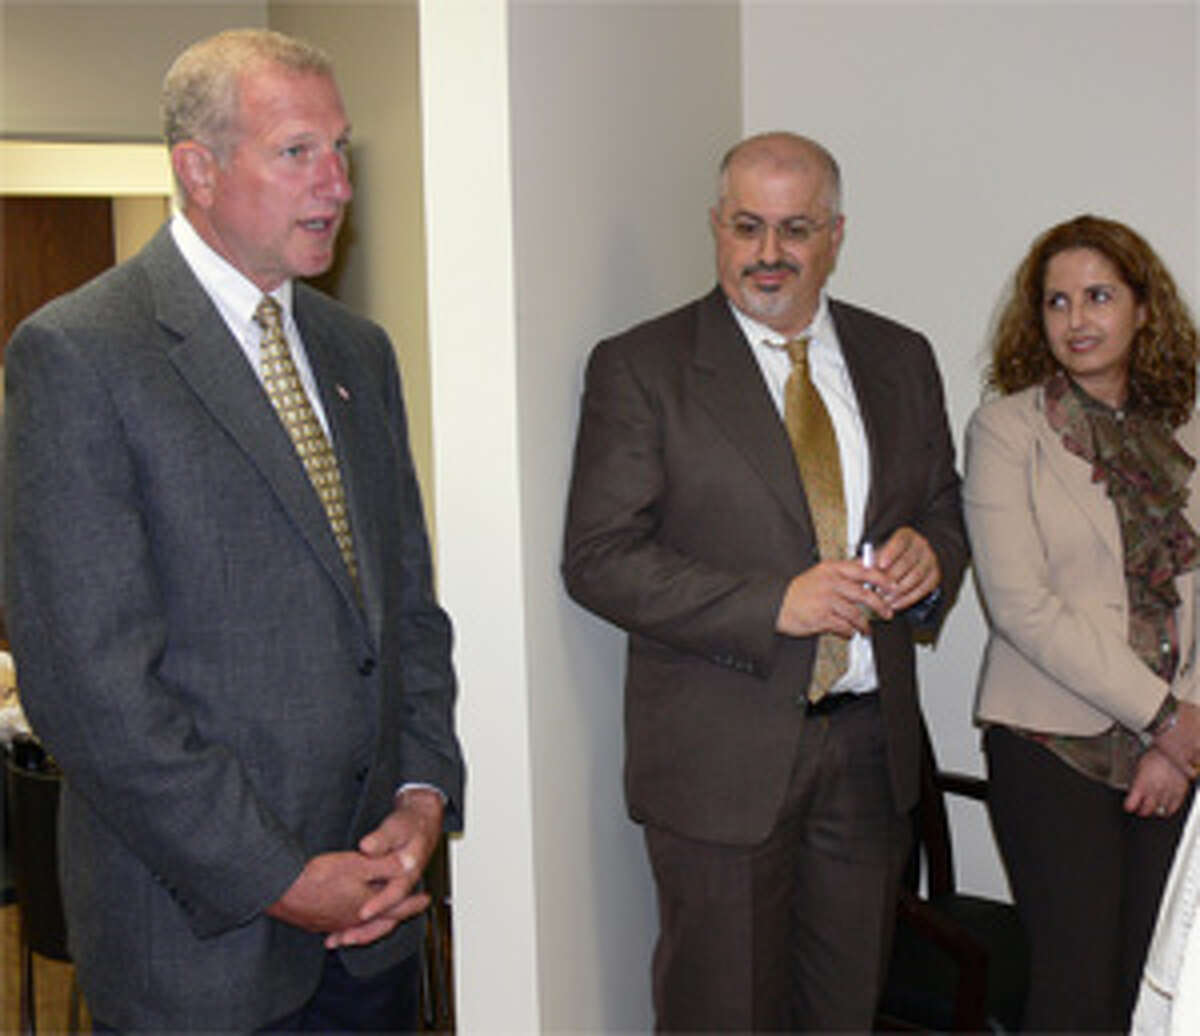 Mayor Mark Lauretti welcomes husband-and-wife Drs. Nami Bayan and Ladan Hamd to Shelton at the Wednesday event.